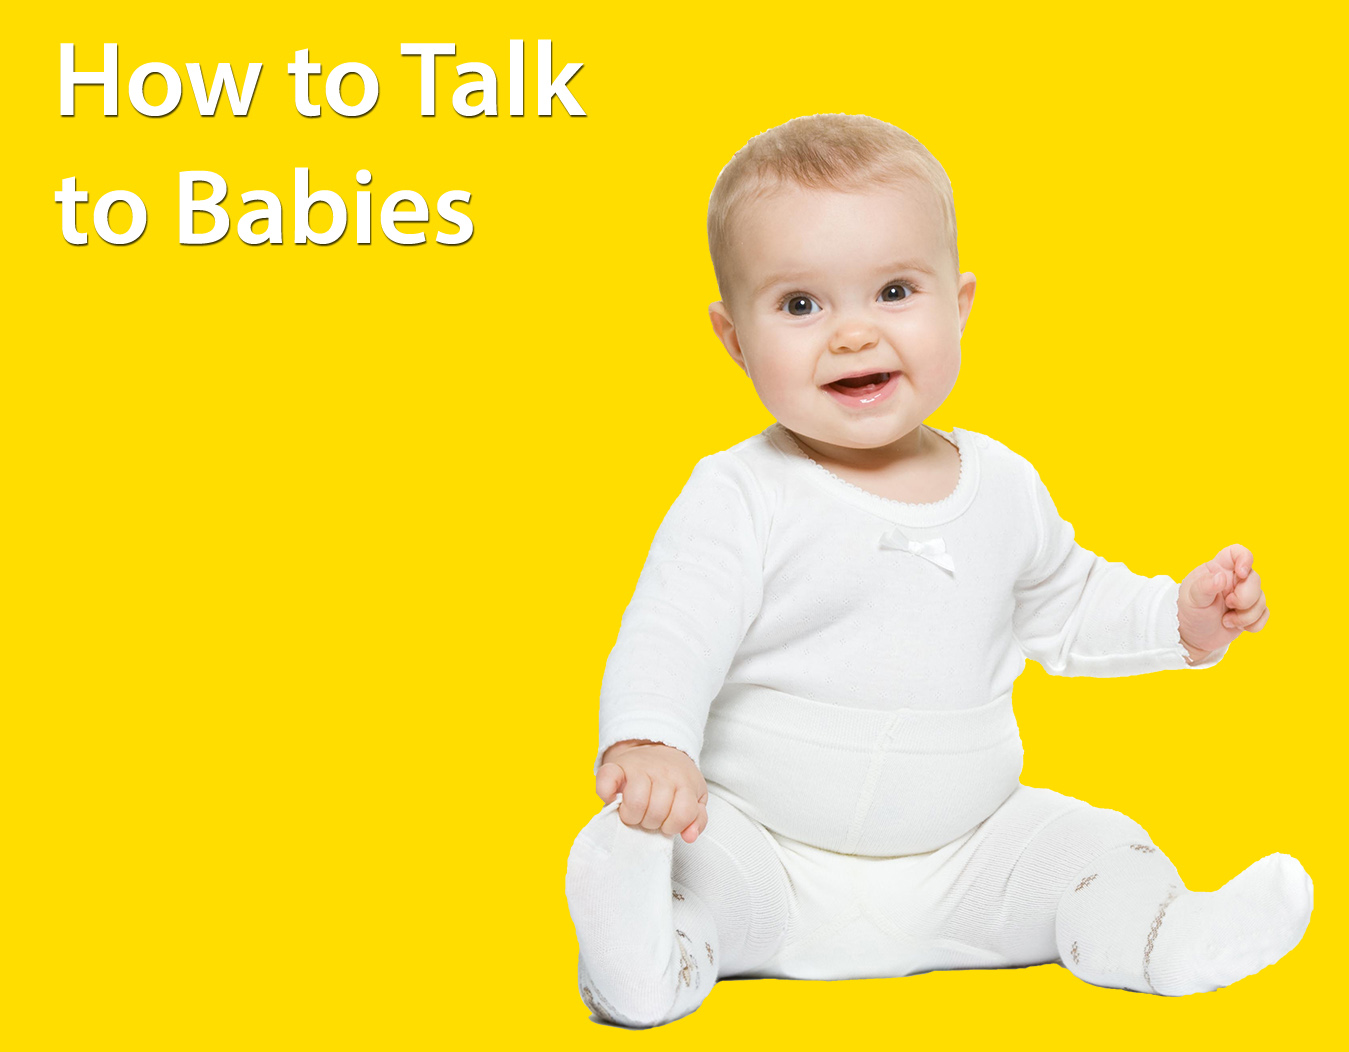 How to Talk to Babies